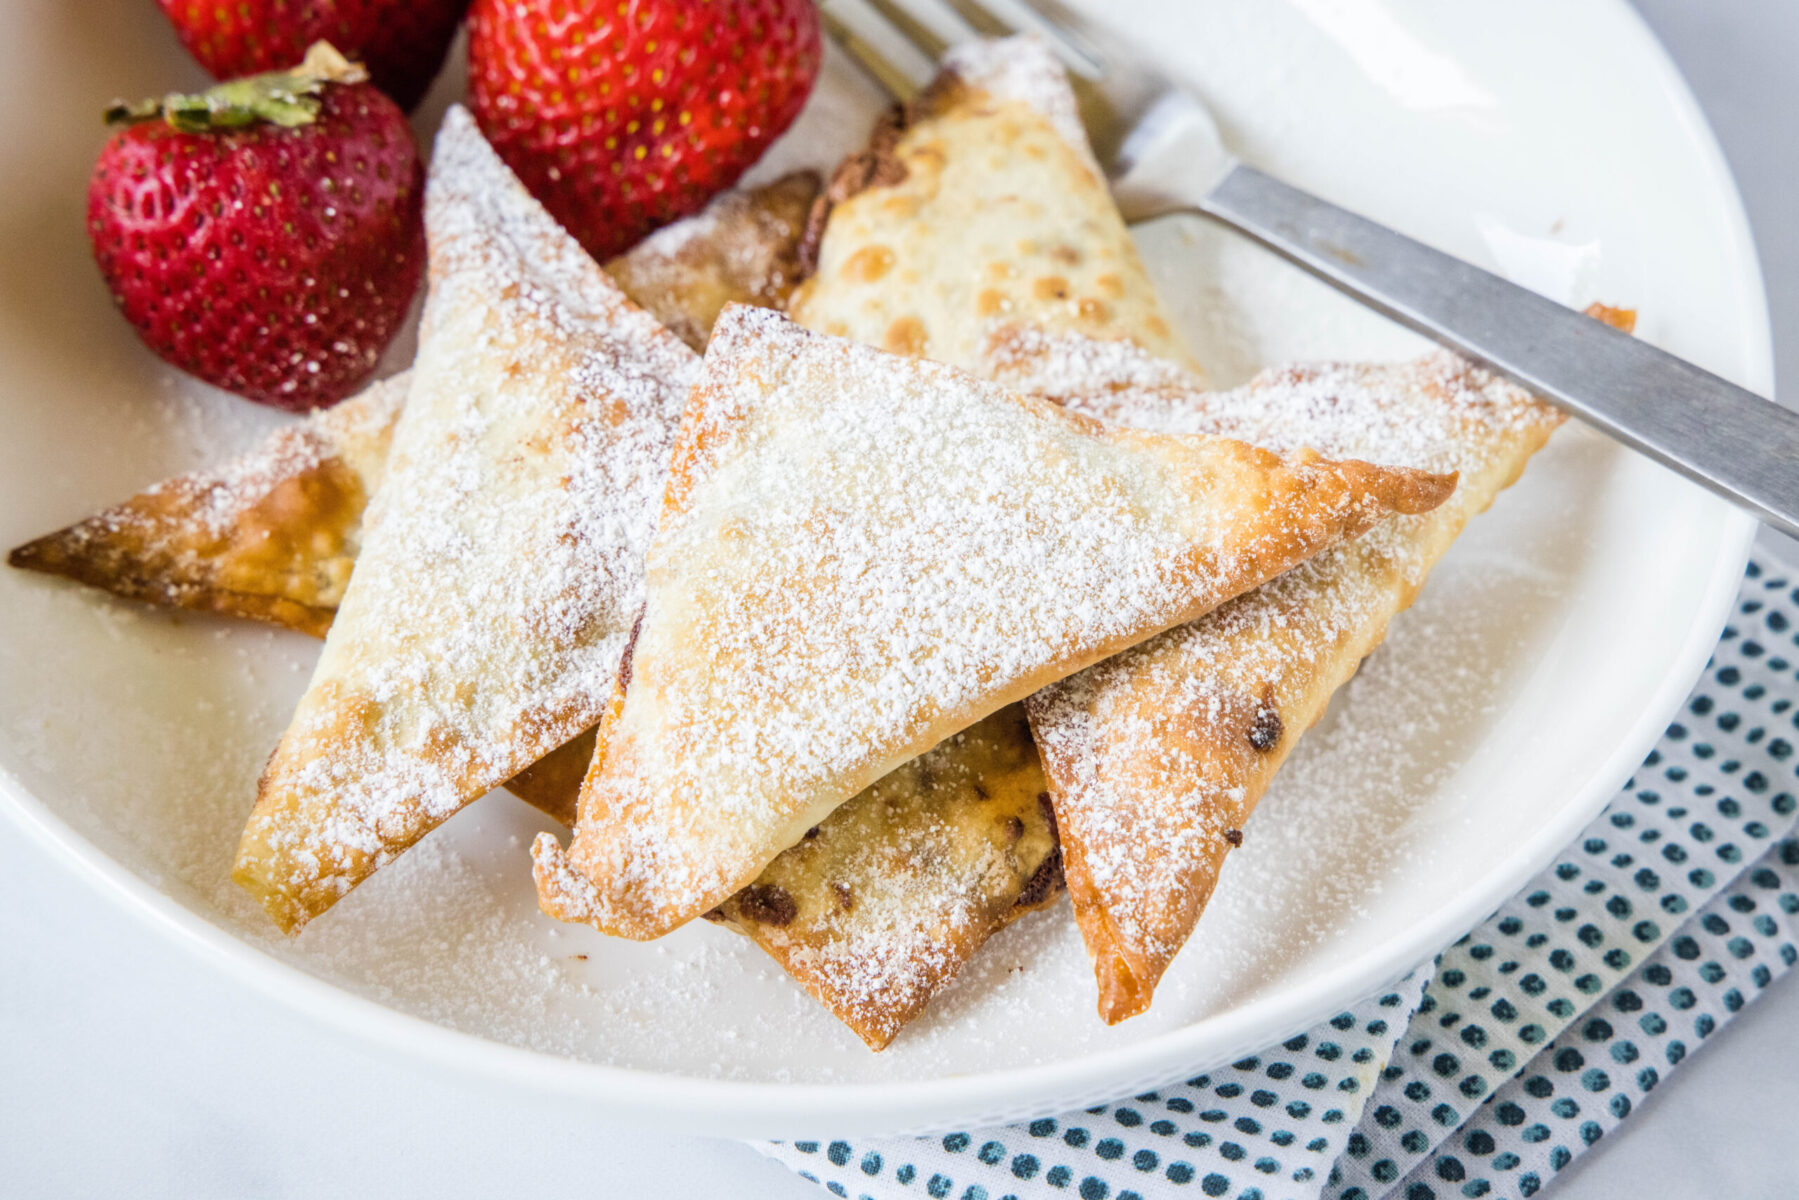 A plate of wontons covered in powdered sugar with strawberries and a fork